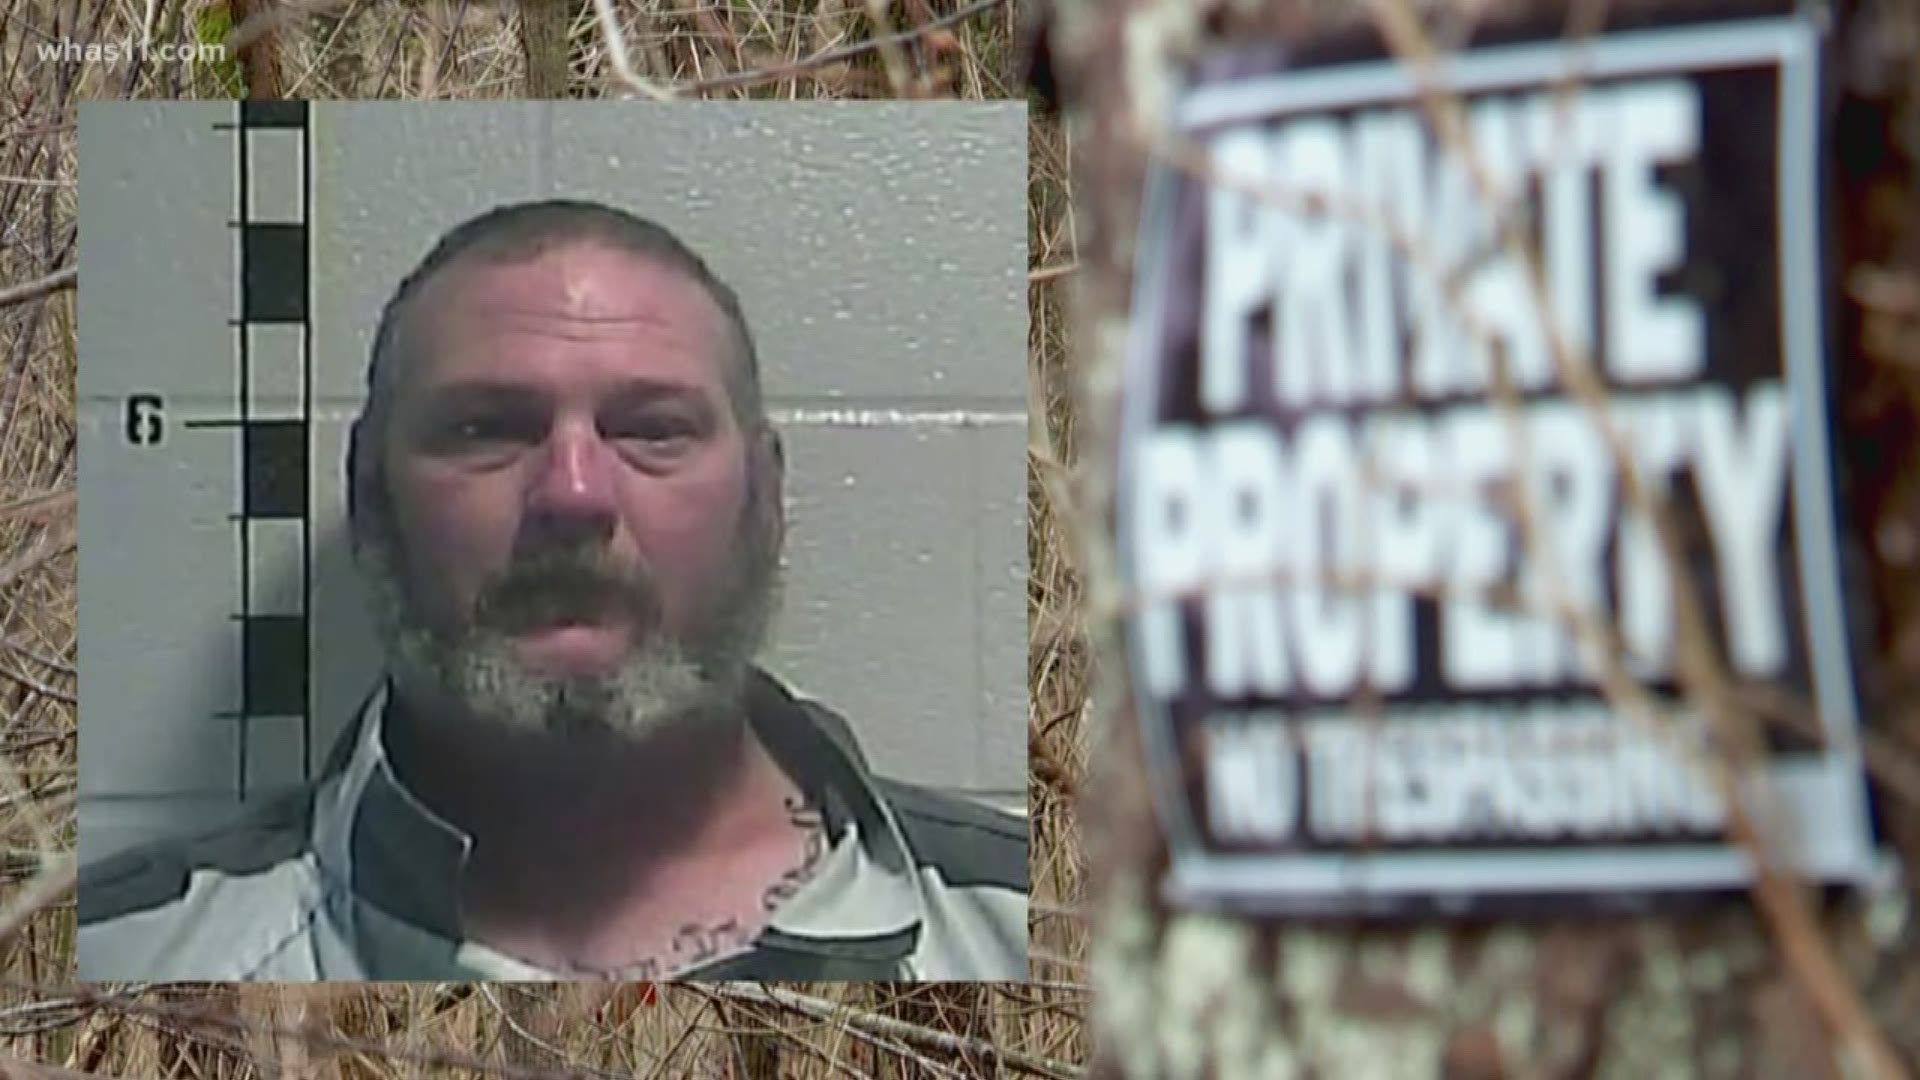 Police say Brian Myers killed William Riddell at Riddell's home near Waddy, Kentucky.